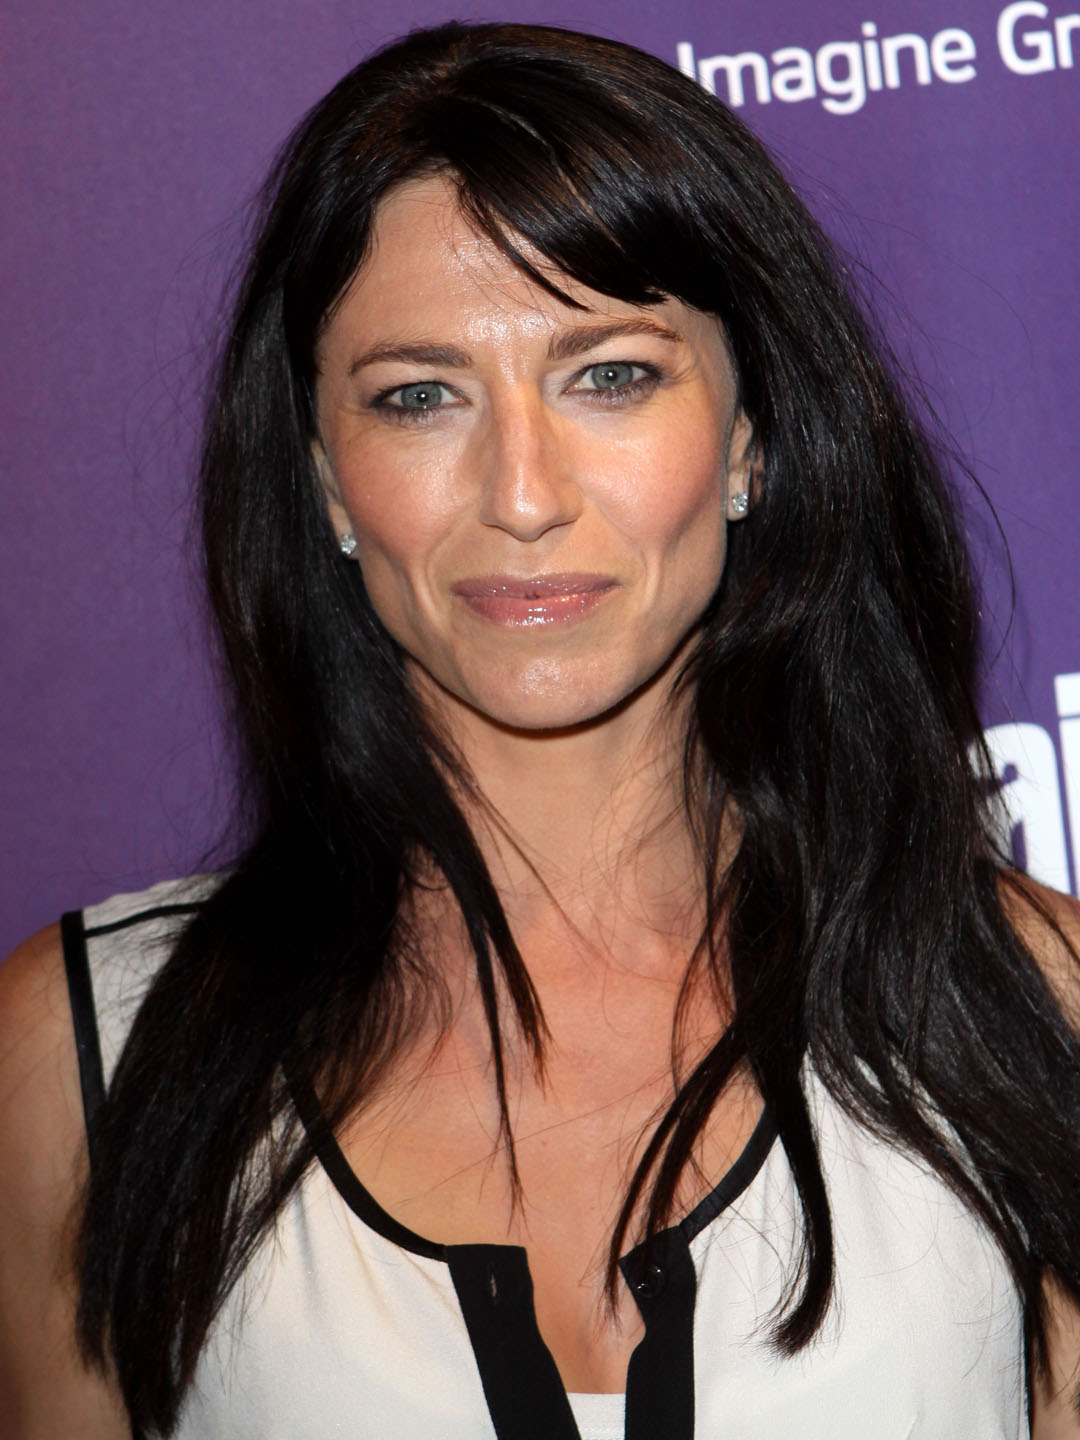 How tall is Claudia Black?